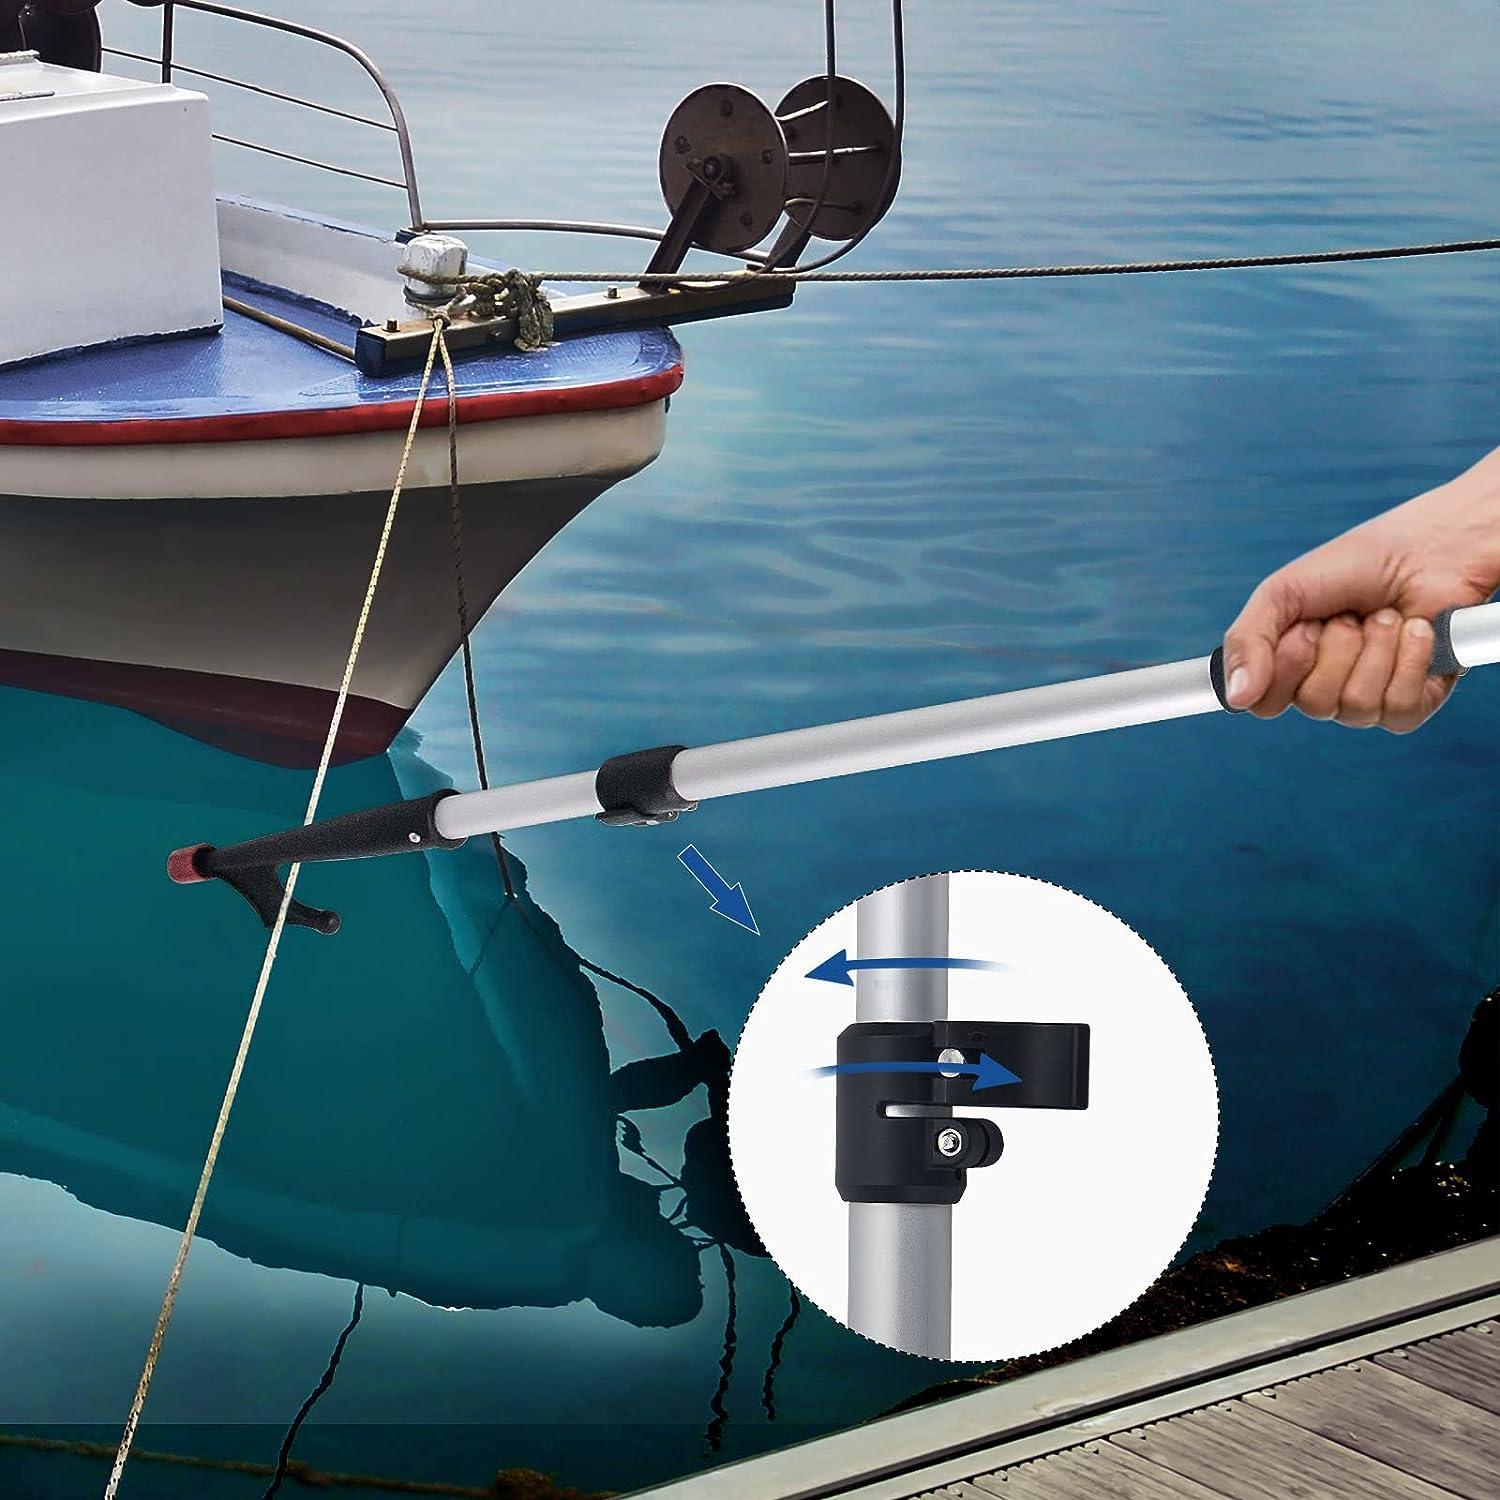 Besramtic Boat Hook Pole for Docking Telescoping from 47.2 Inches ( 3.93 Ft  ) to 82.6 Inches ( 6.9 Ft Anodized Aluminum Shaft